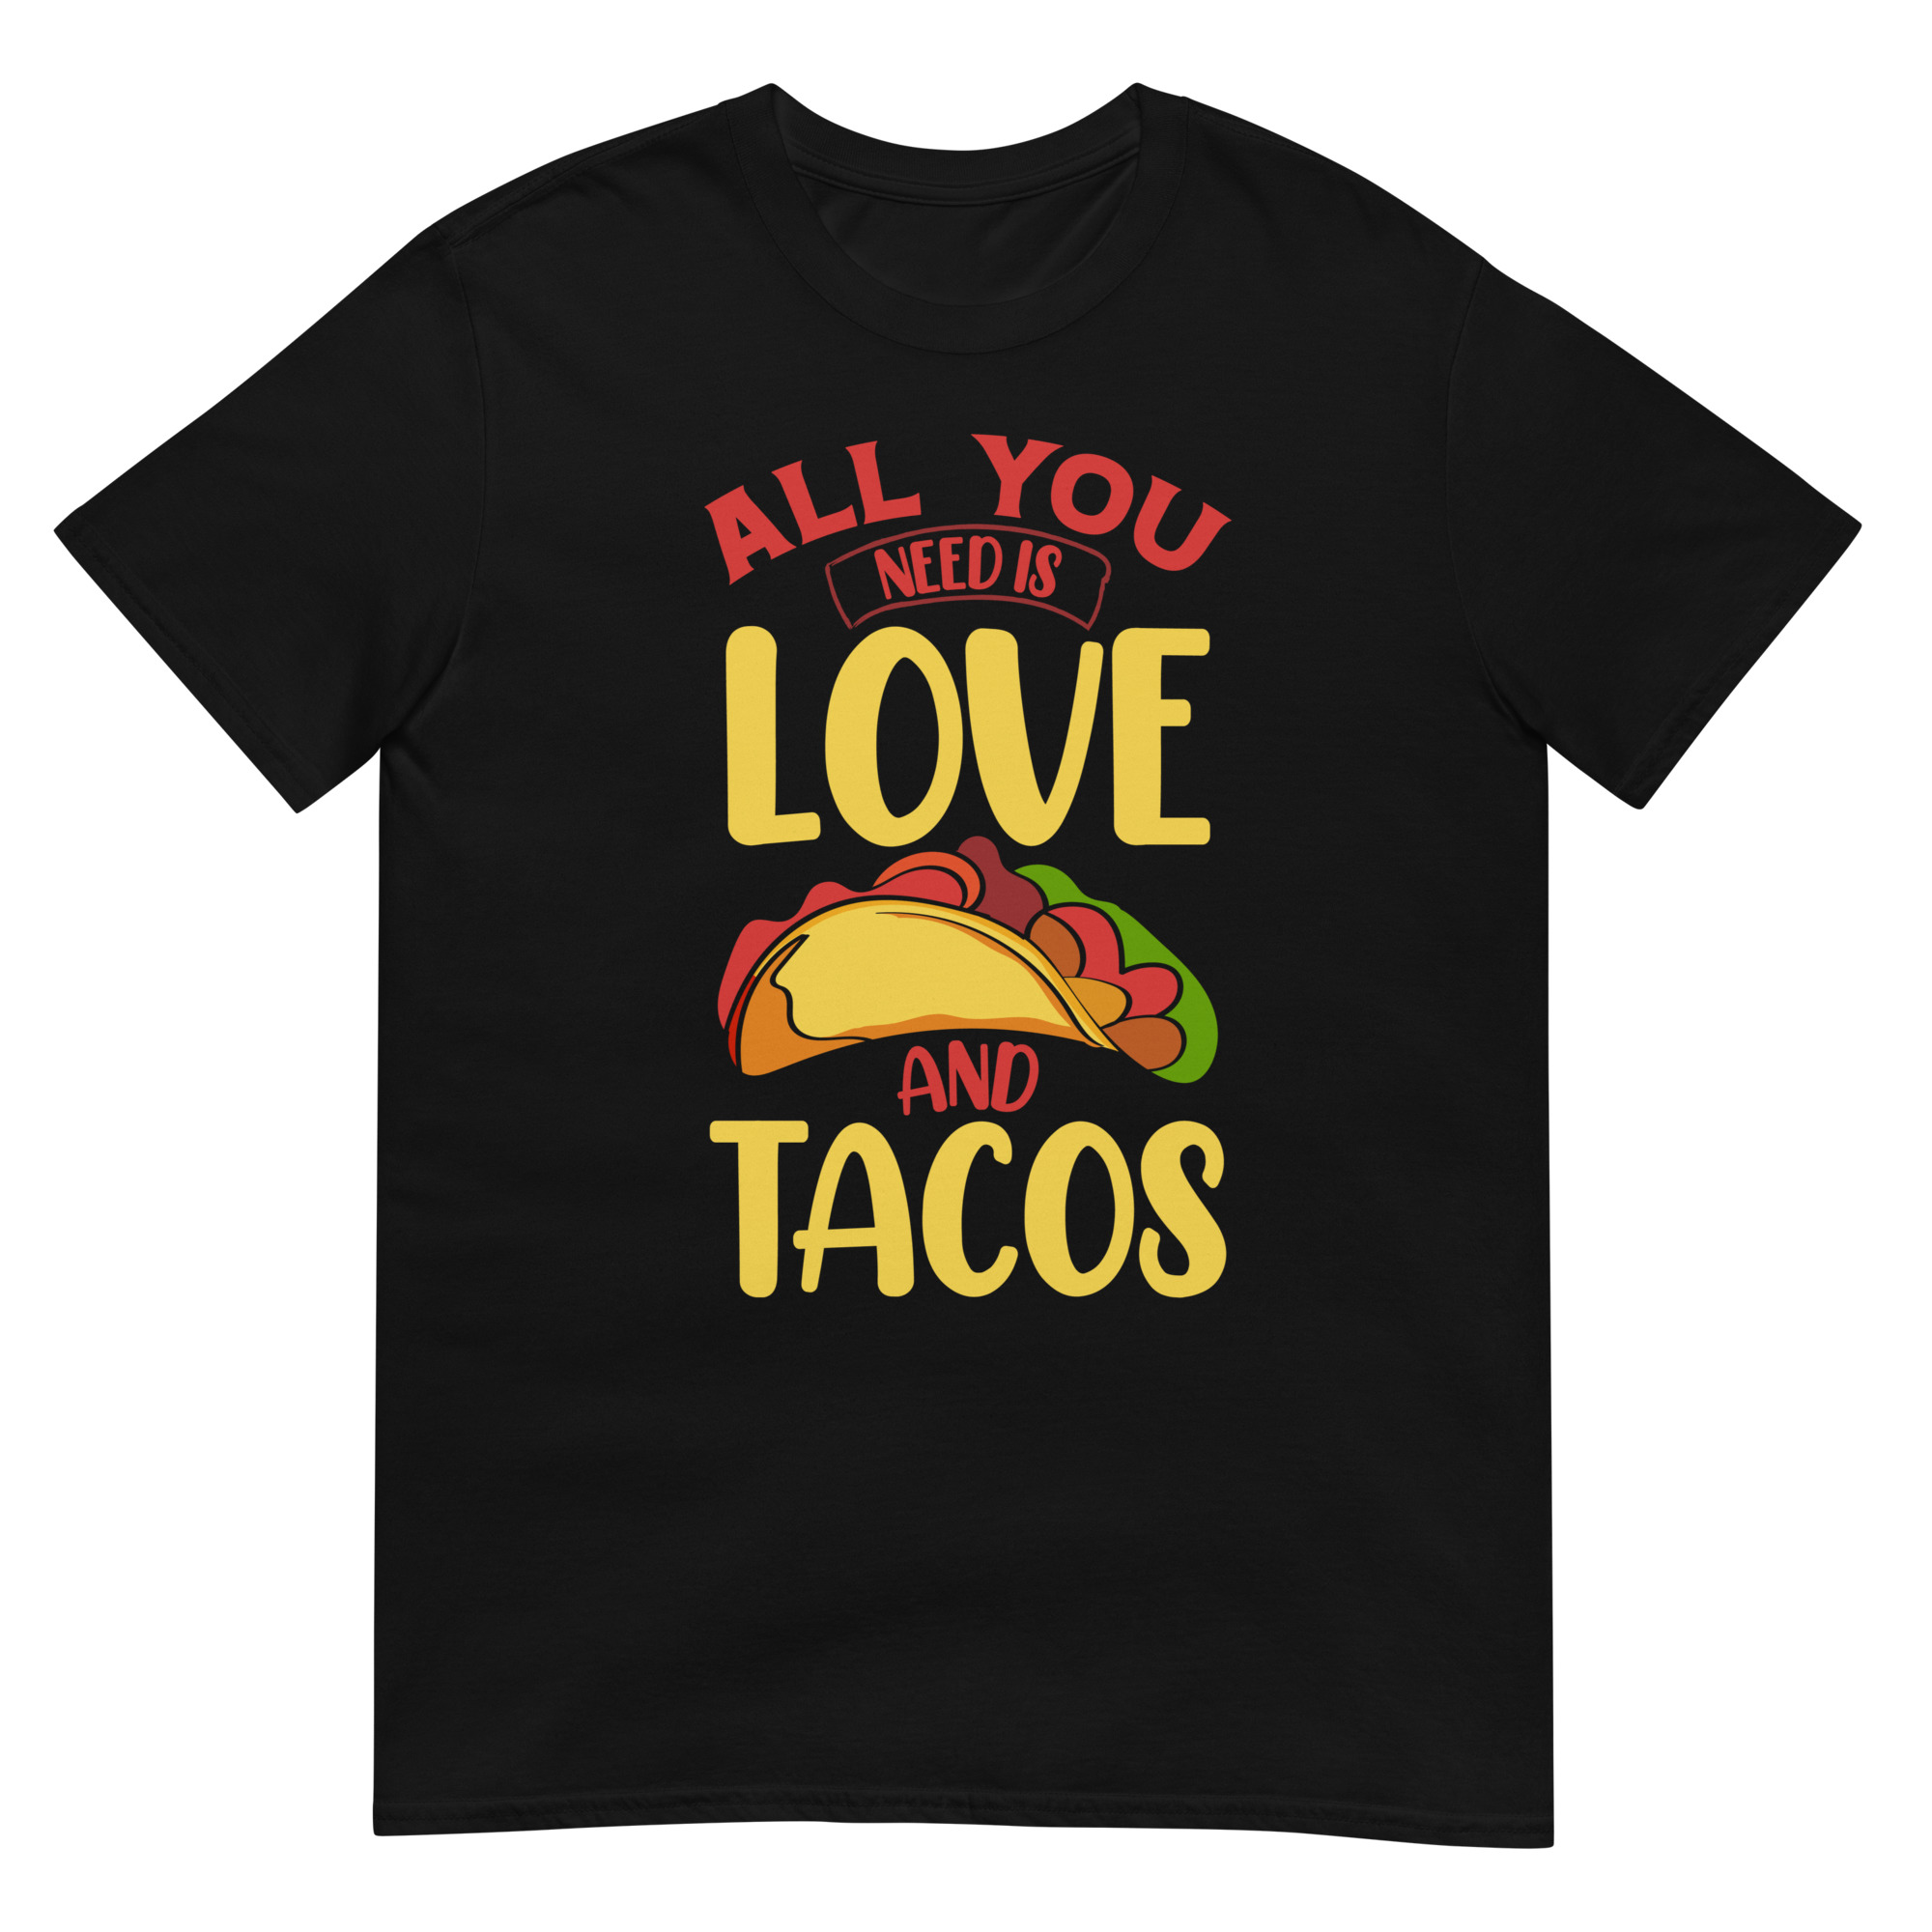 All You Need Is Love And Tacos - Unisex Tacos T-Shirt